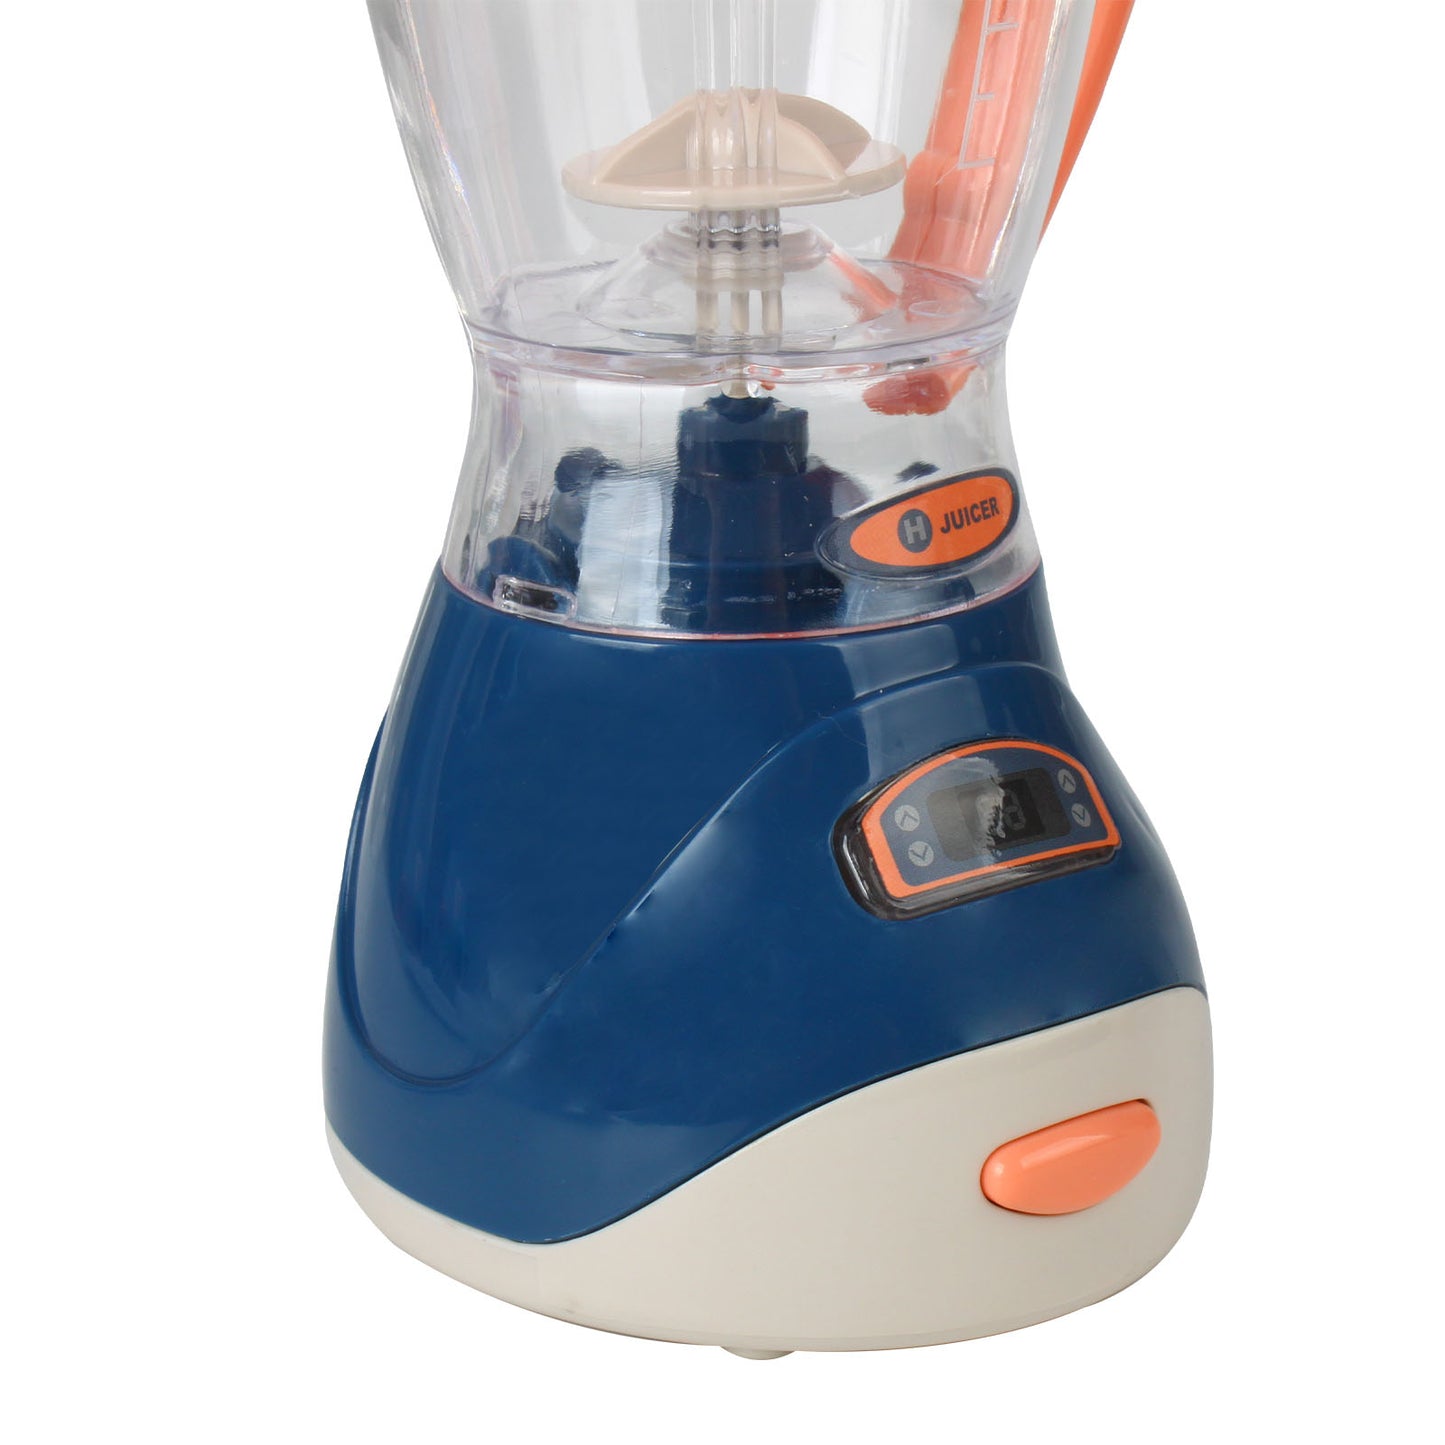 Andux Pretend Household Toy Without Batteries  WJXJD-01 (Juicer)